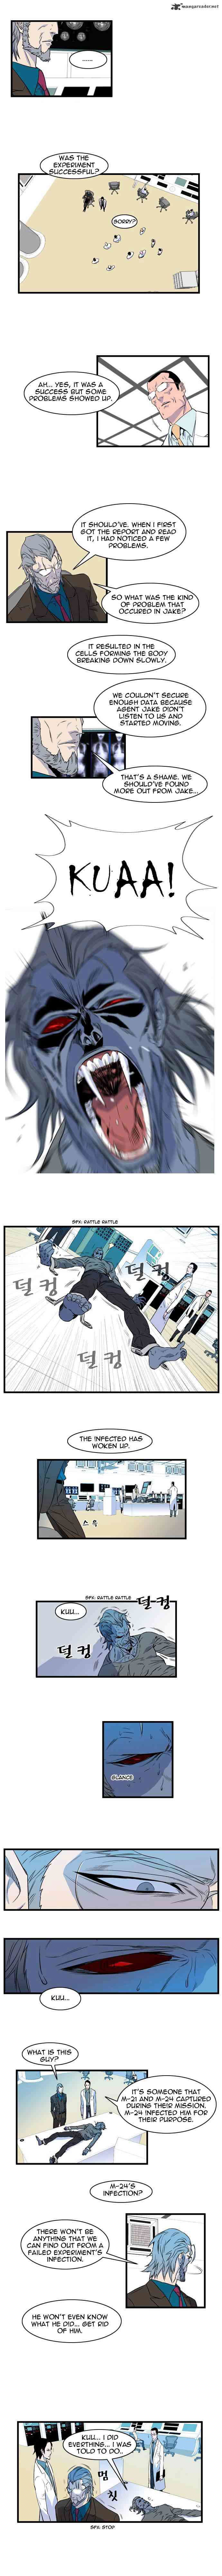 Noblesse Chapter 76 _ Chapters 76-90 page 32